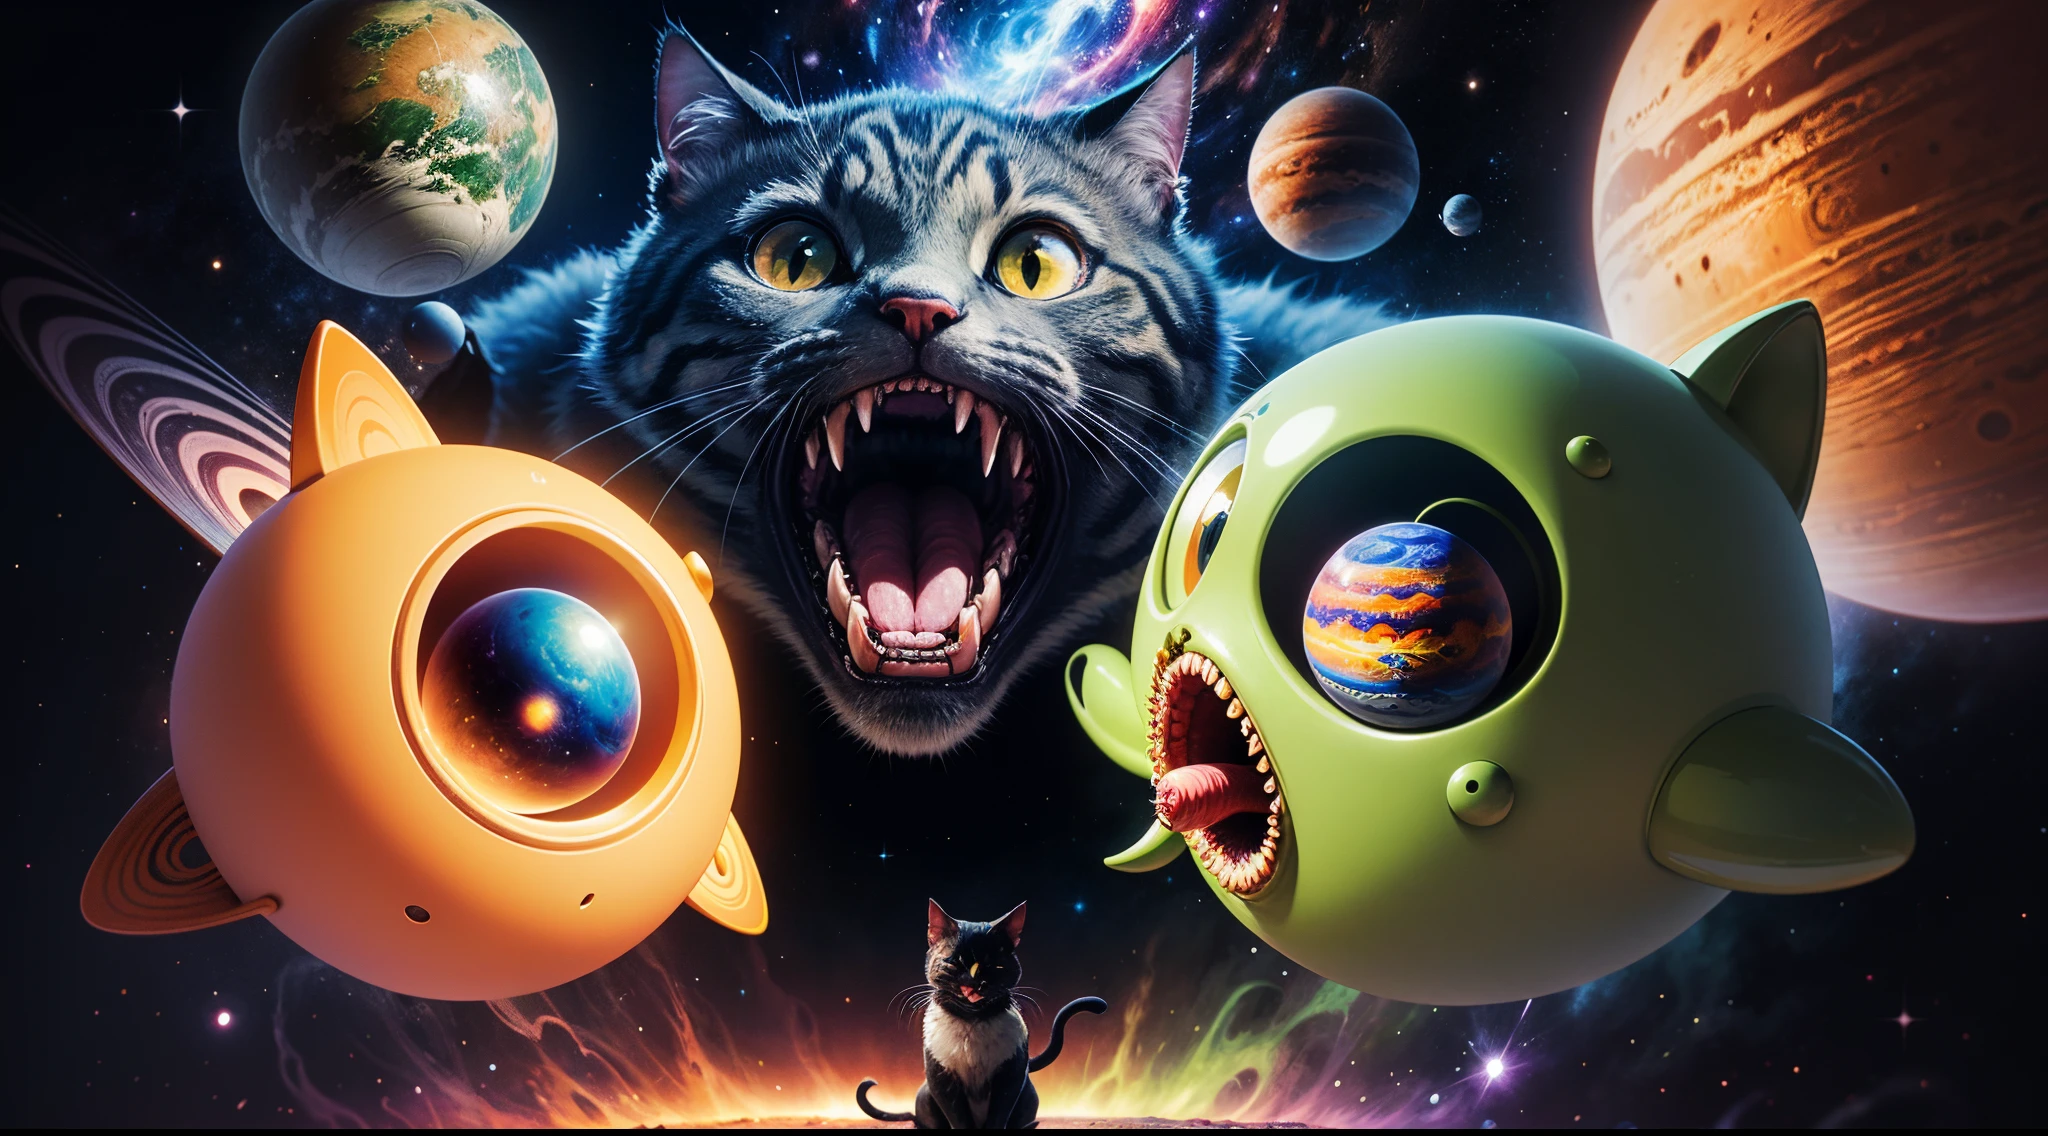 a cartoon of a cat with its mouth open and planets in the background, devouring a planet, alien mouth, cosmic horror style, cosmic horror illustration, psychedelic cosmic horror, cosmic horror!!, outerspace, cosmic lsd poster art, weird space, psychedelic illustration, cosmic horror!!!, feeds on the entire cosmos, giant mouth, space, 3d grainy aesthetic illustration